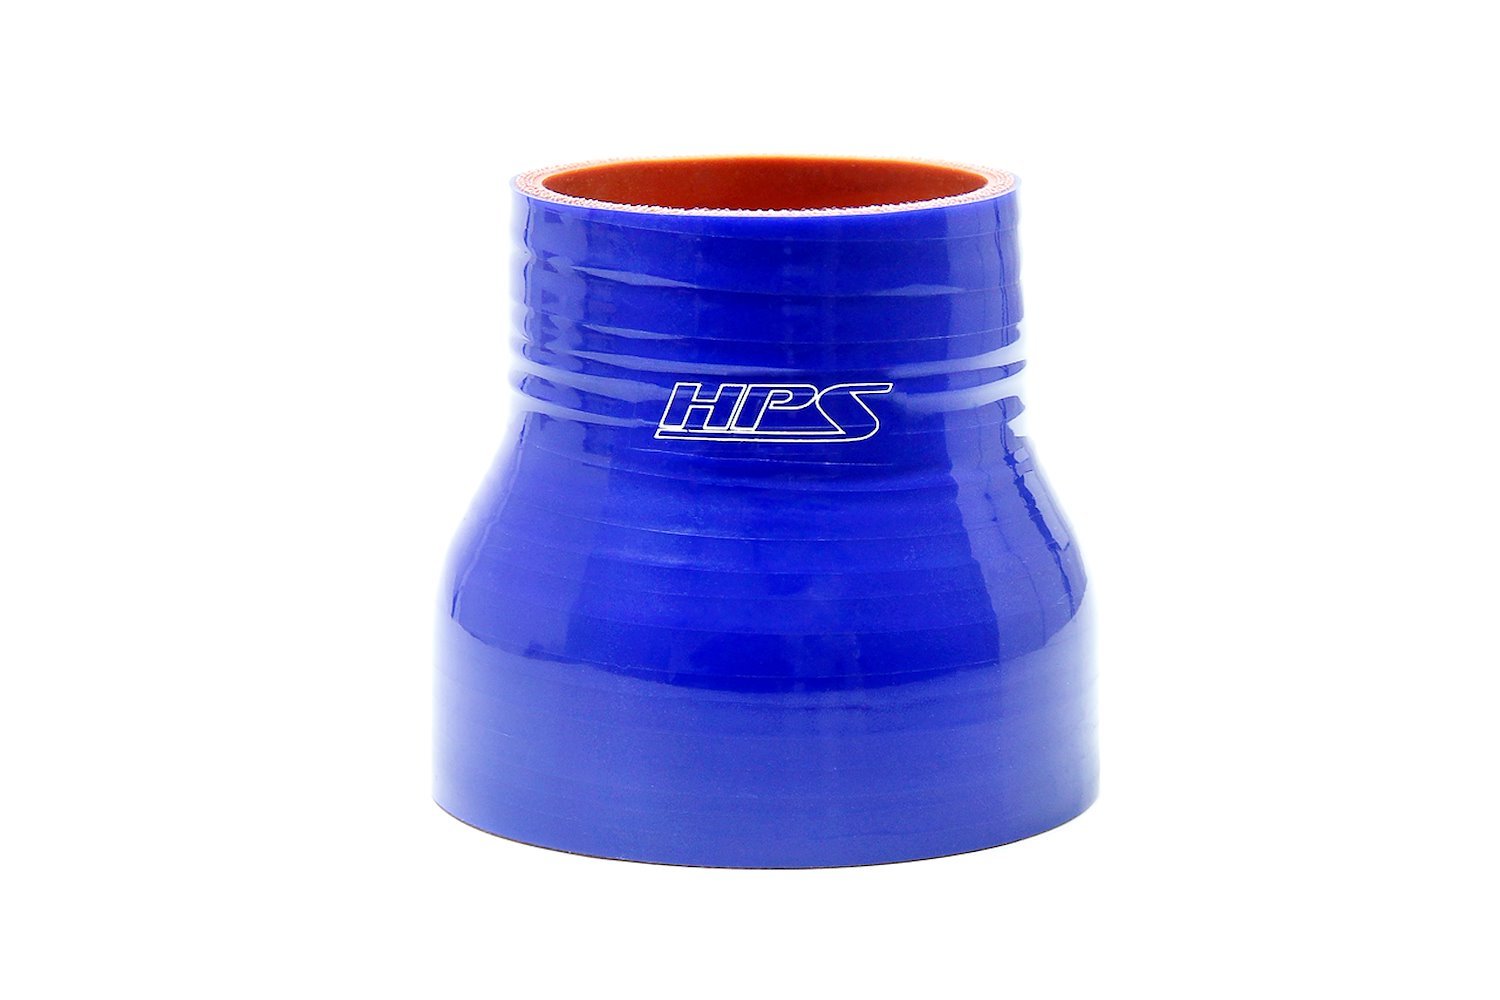 HTSR-162-187-BLUE Silicone Reducer Hose, High-Temp 4-Ply Reinforced, 1-5/8 in. - 1-7/8 in. ID, 3 in. Long, Blue